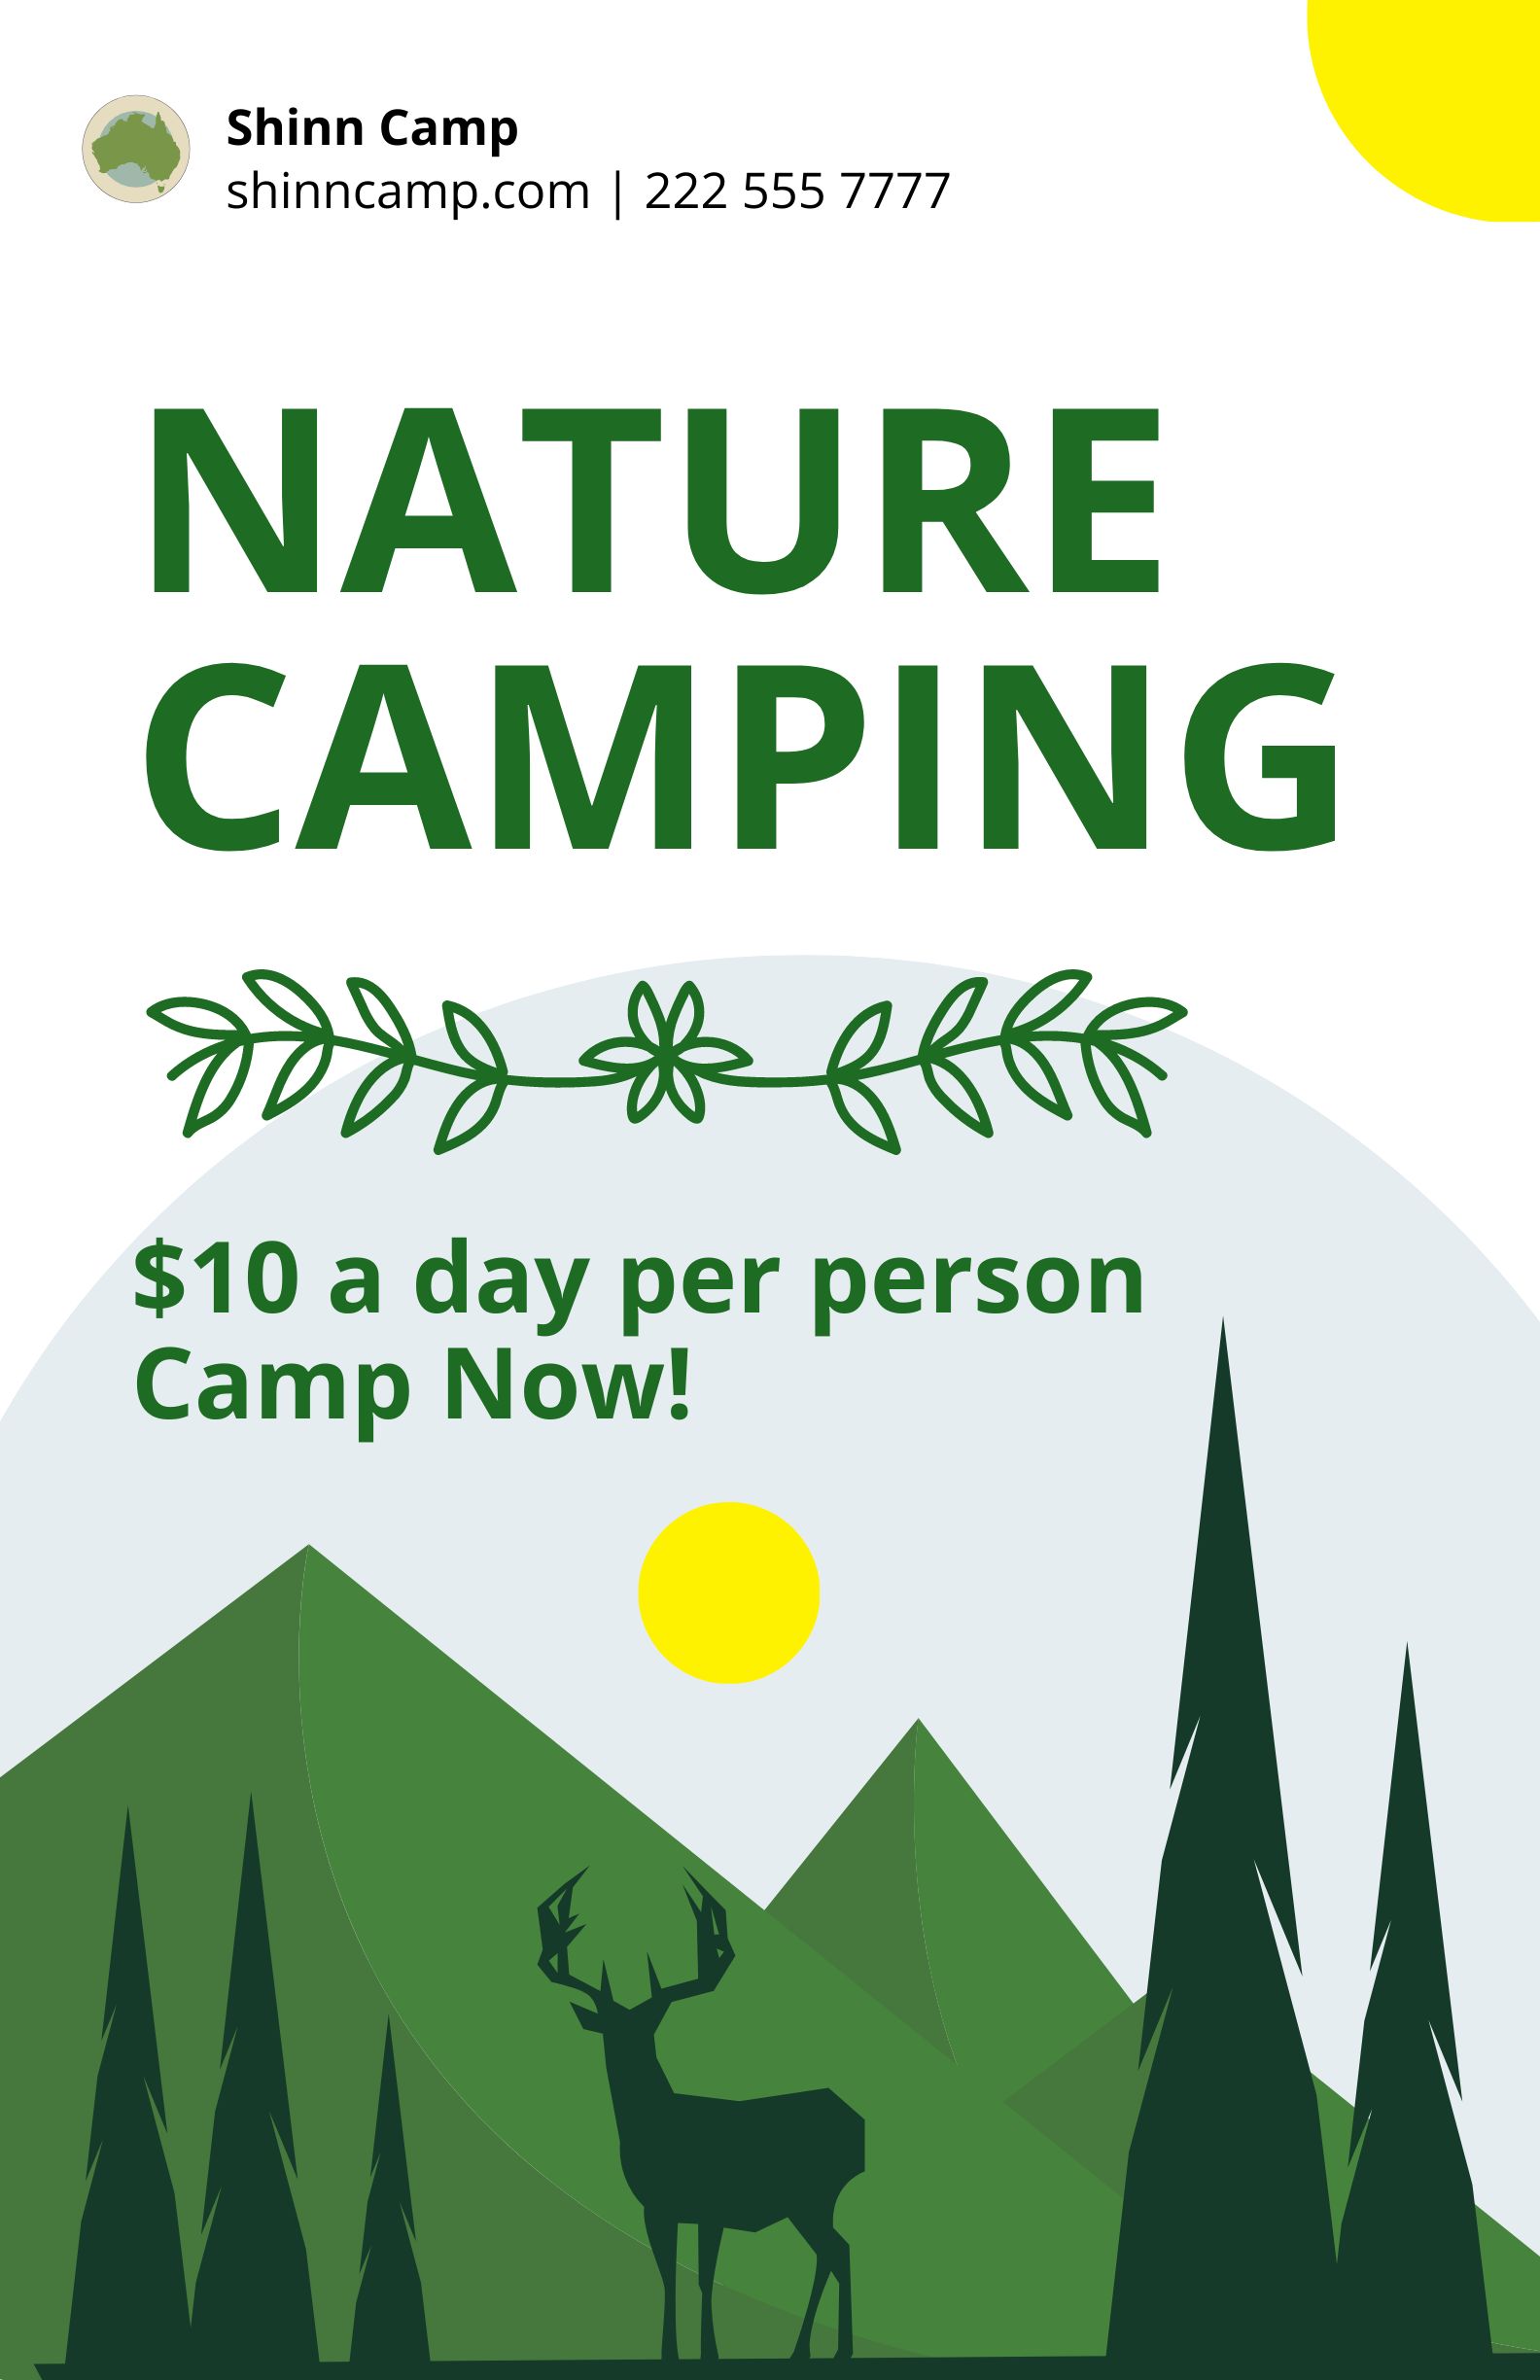 Free Nature Camping Poster Template in Word, Google Docs, Illustrator, PSD, Apple Pages, Publisher